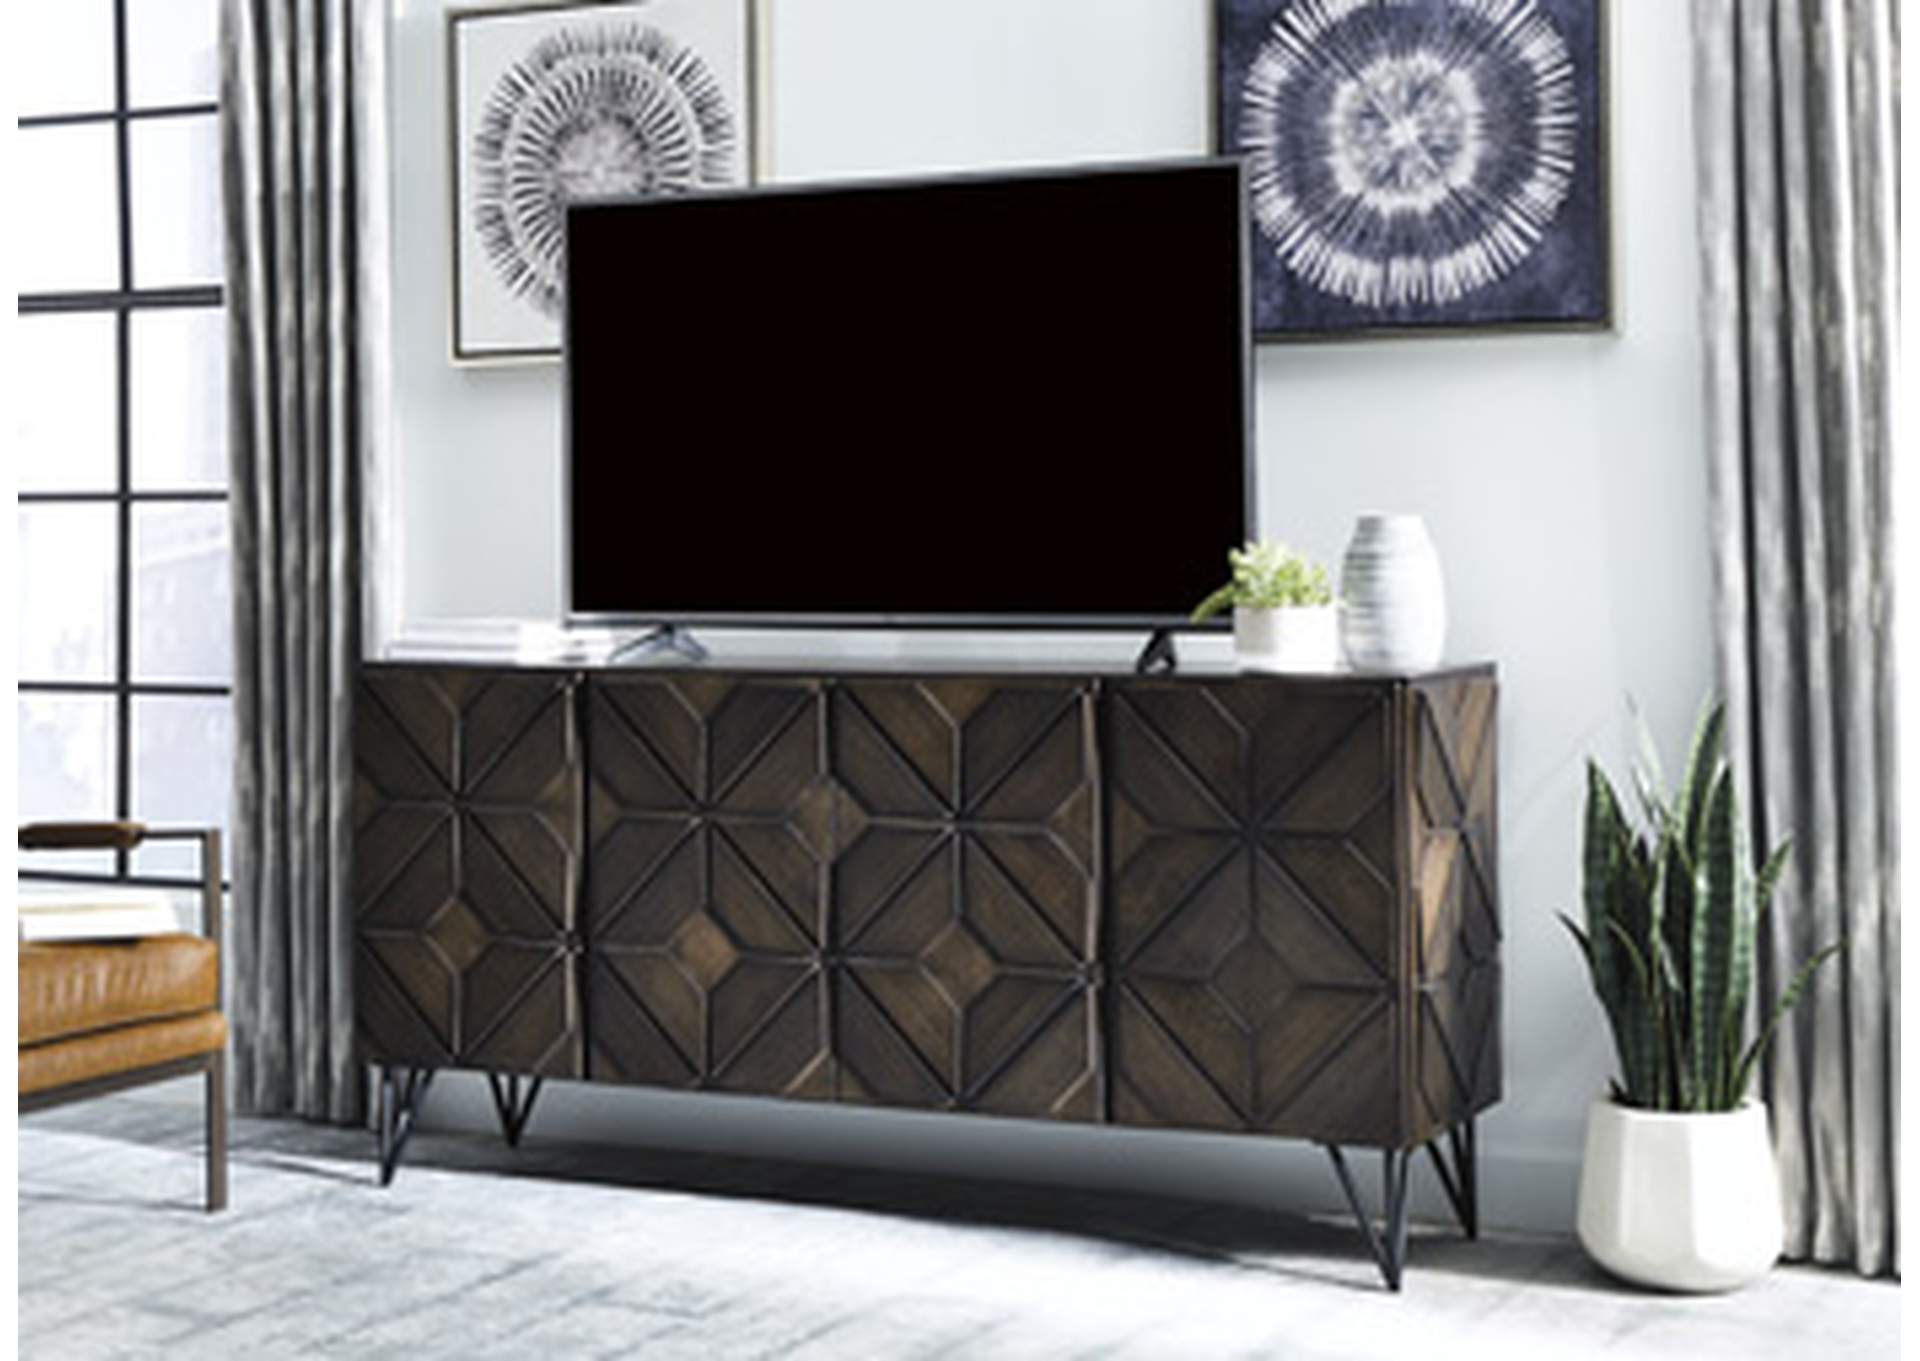 Chasinfield 72" TV Stand,Signature Design By Ashley